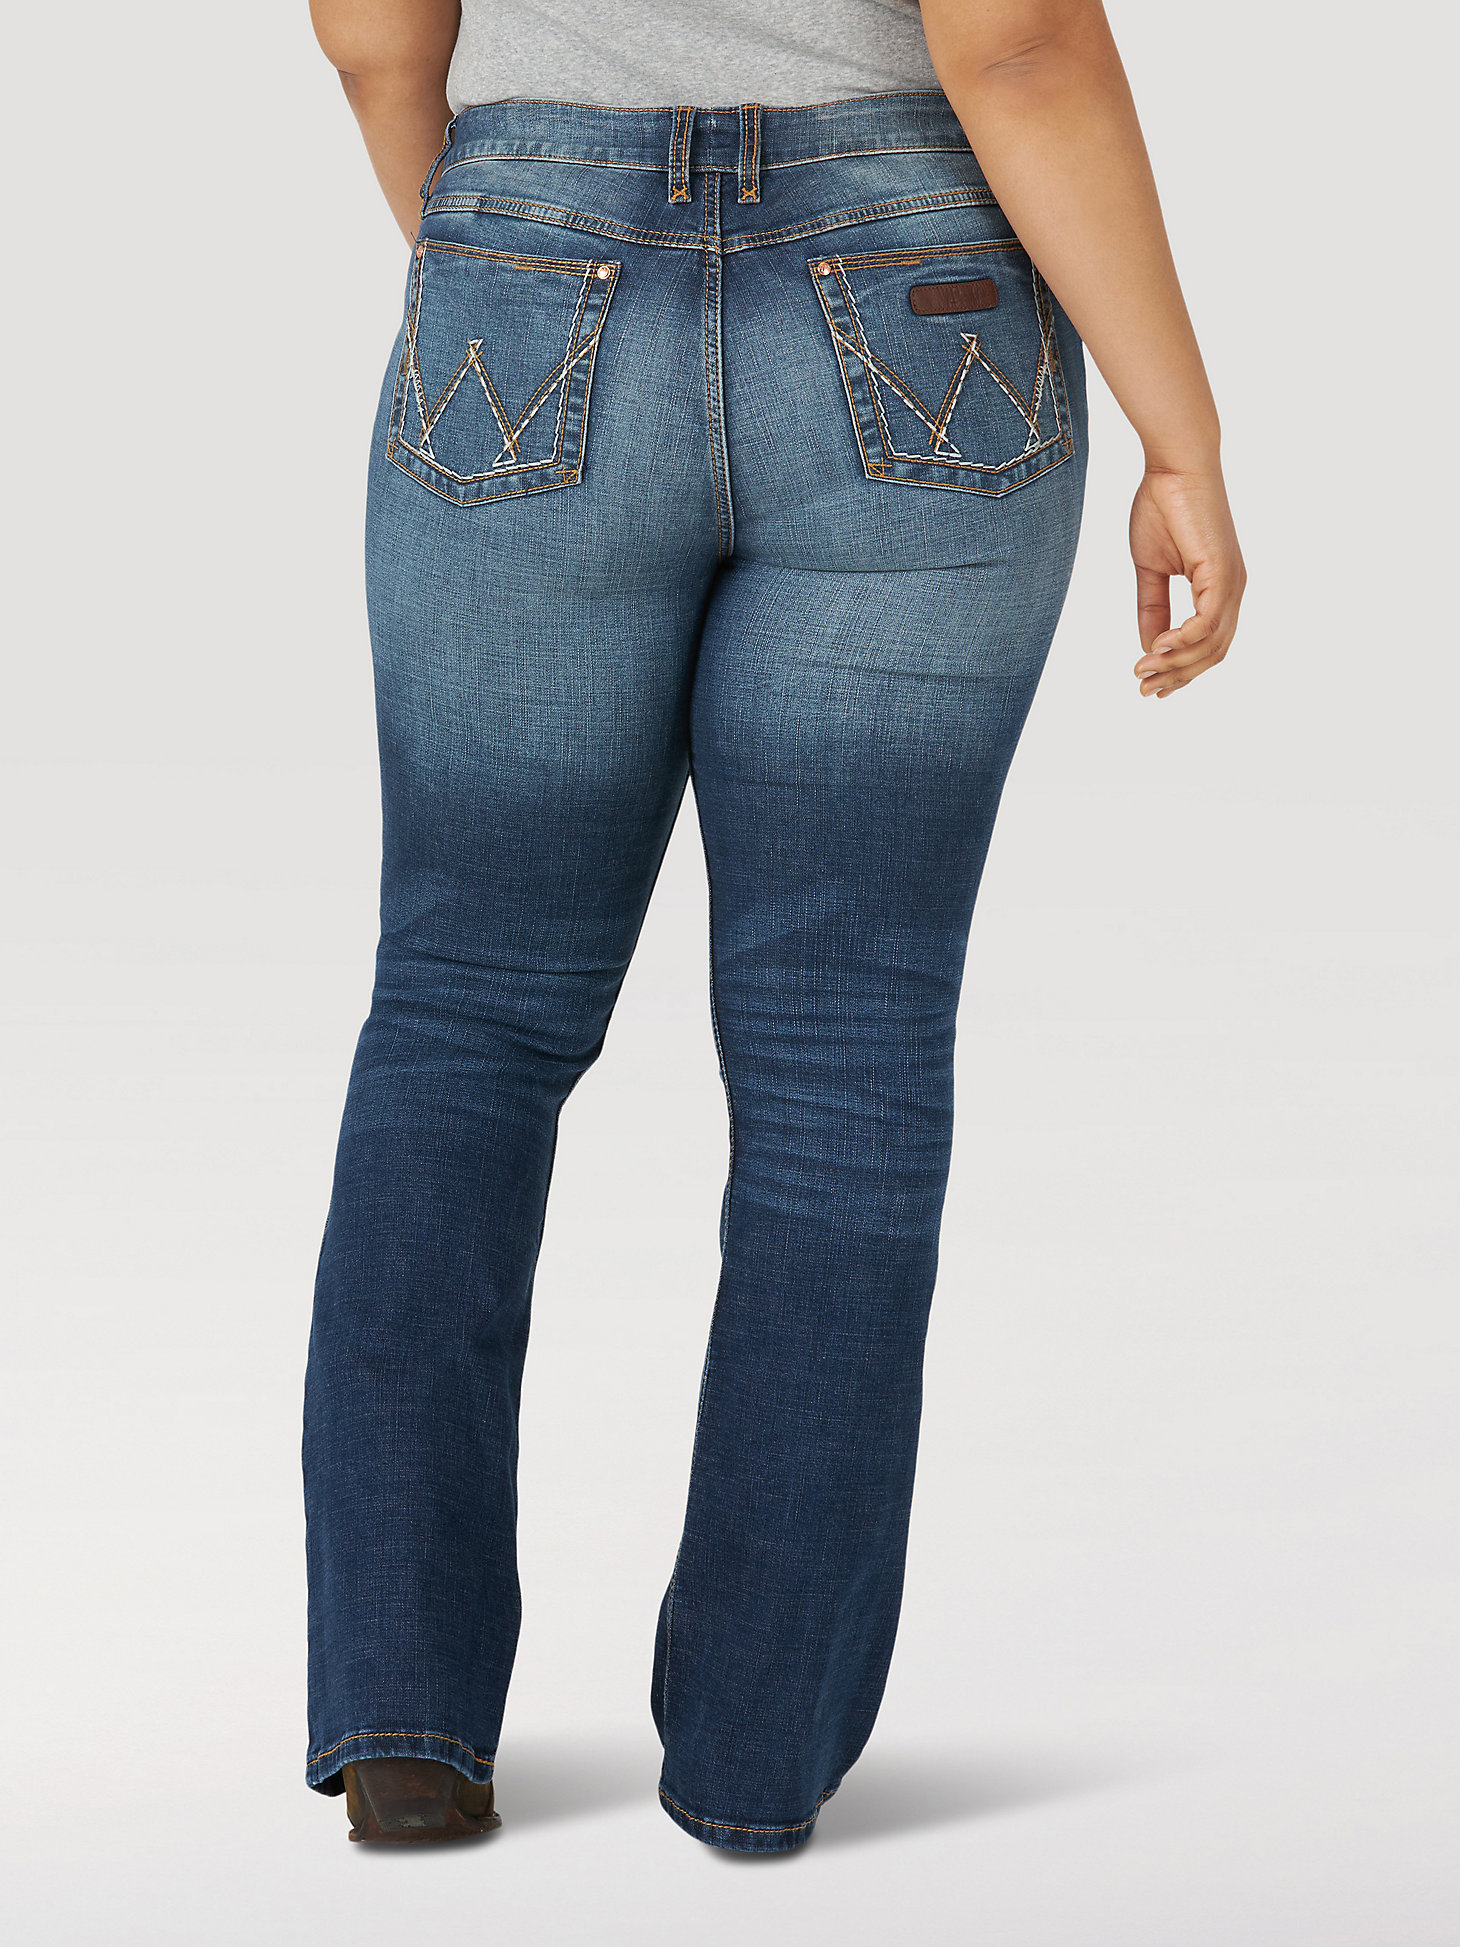 Wrangler Mae Cowgirl Draw Jeans 